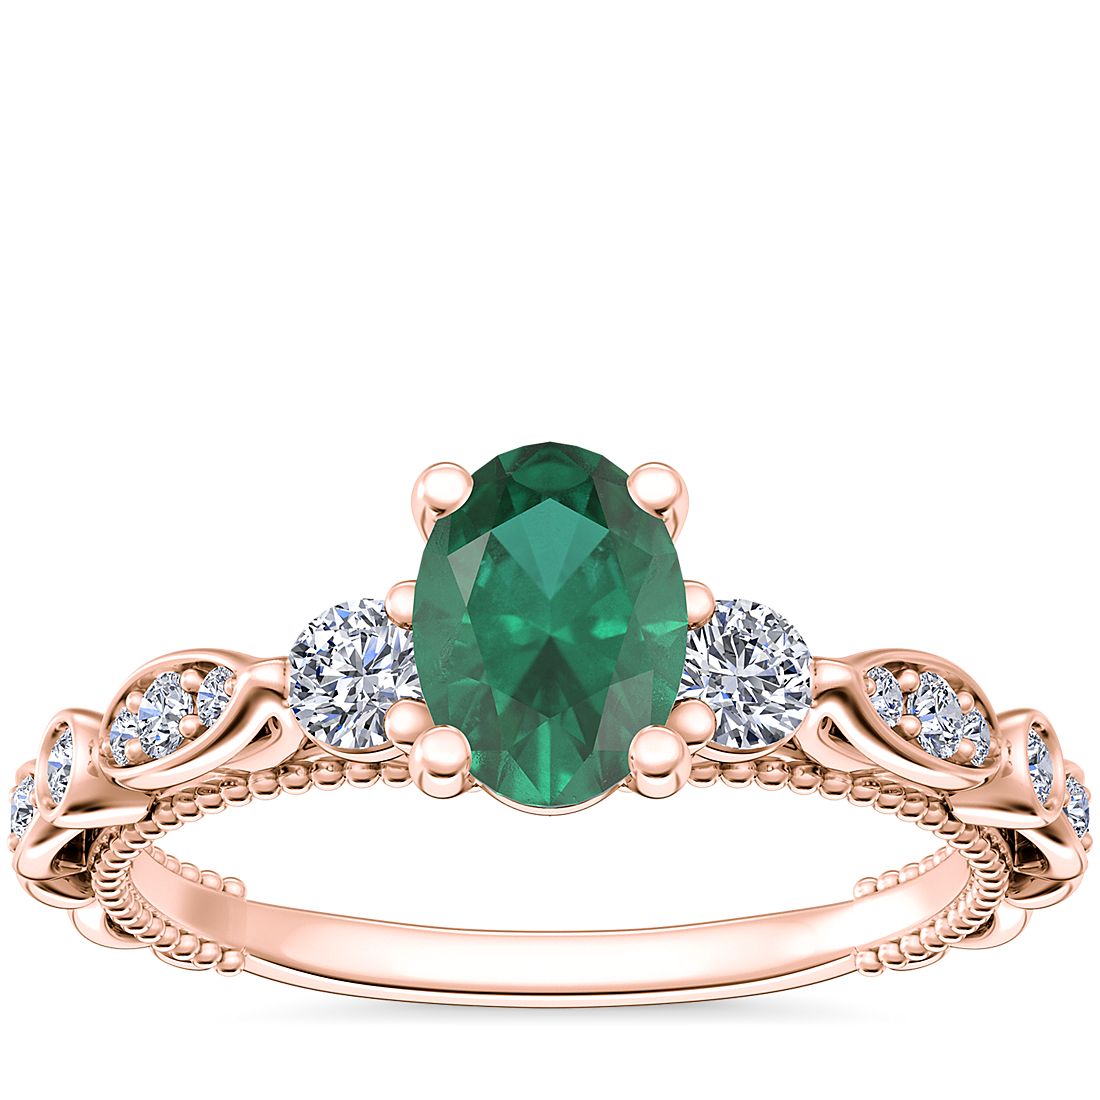 Floral Ellipse Diamond Cathedral Engagement Ring with Oval Emerald in 14k Rose Gold (7x5mm)